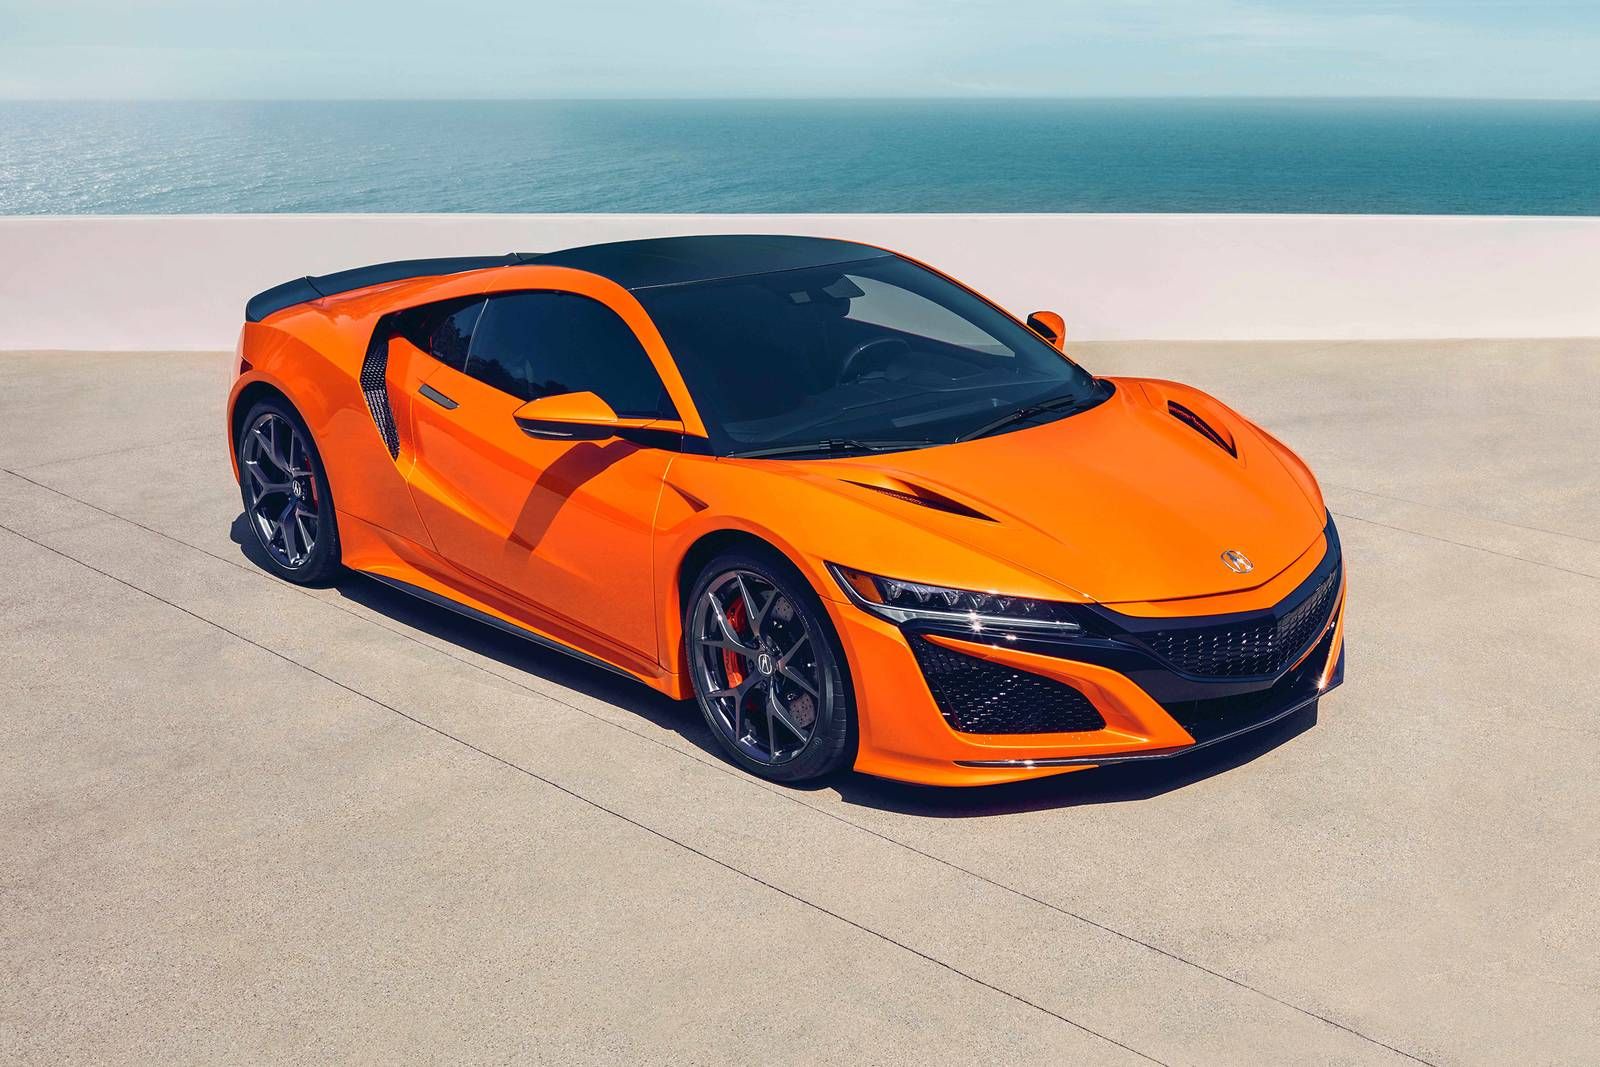 2020 Acura NSX: Sports coupe ready to race.